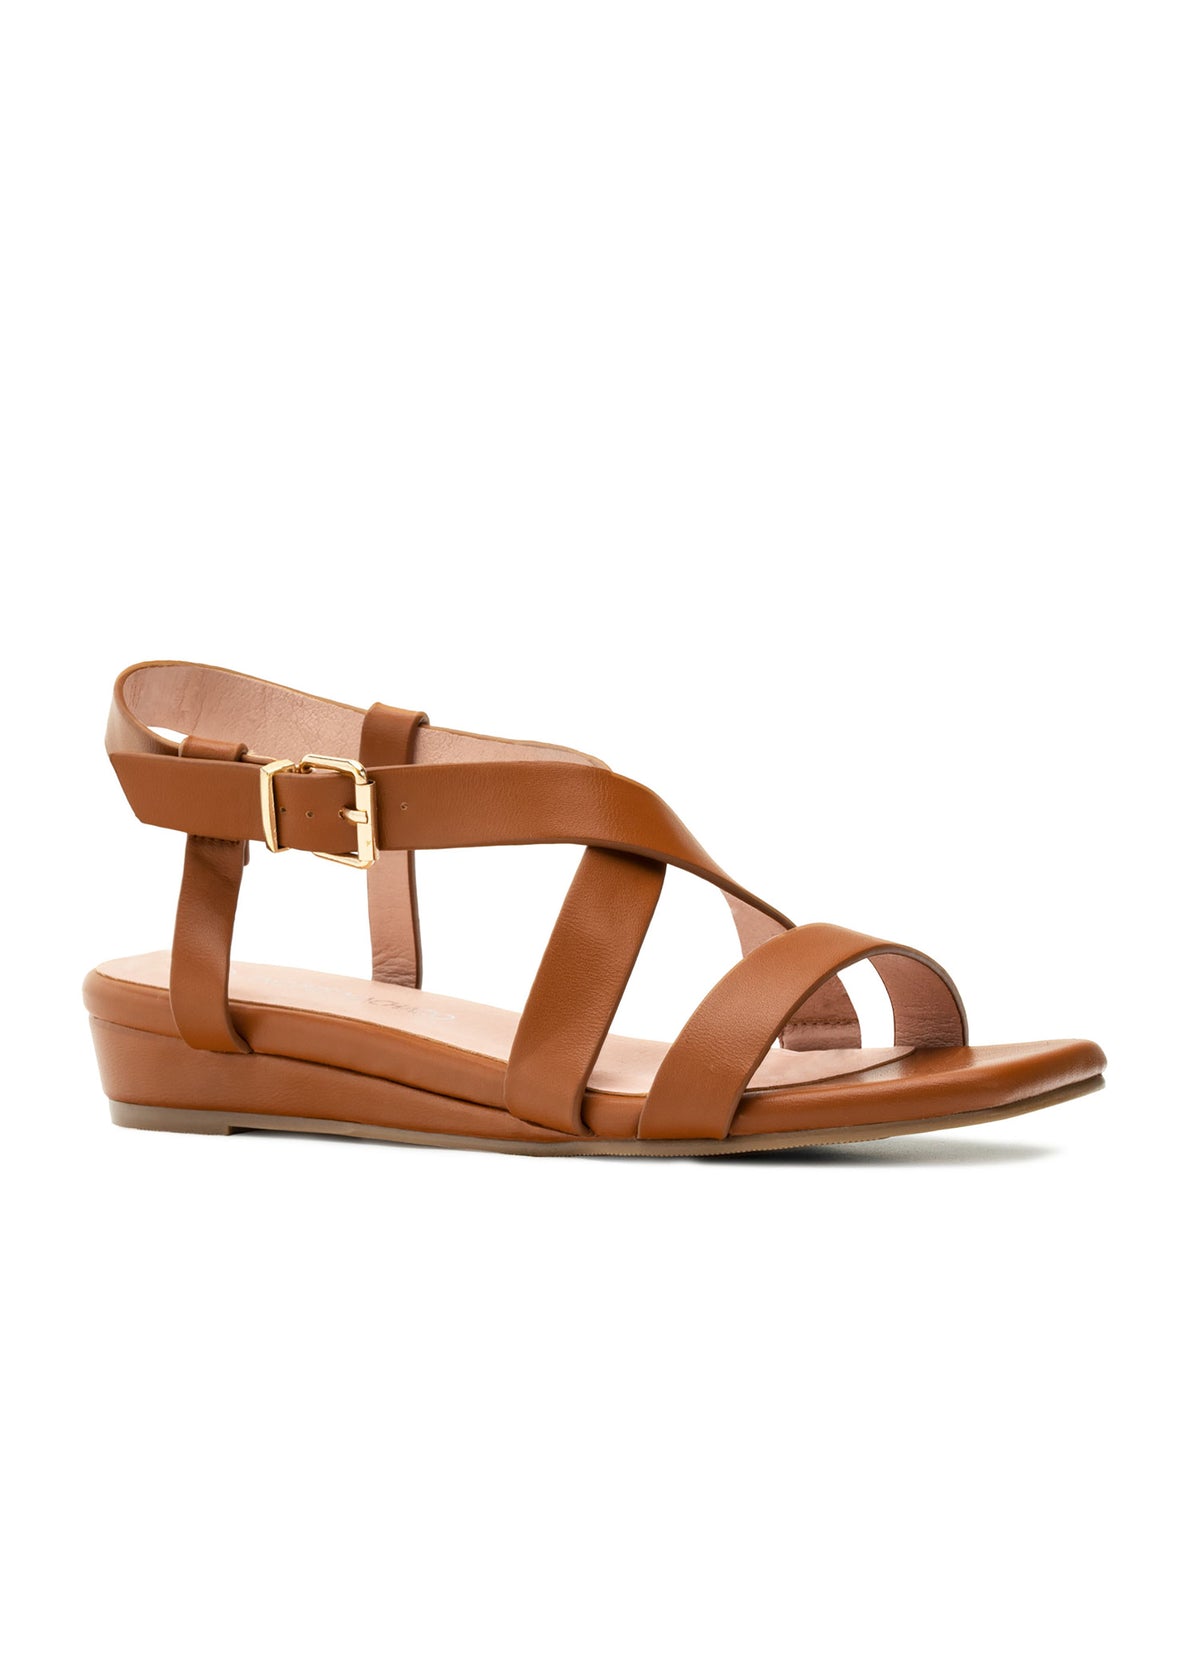 Strappy sandals with a low wedge heel - brown